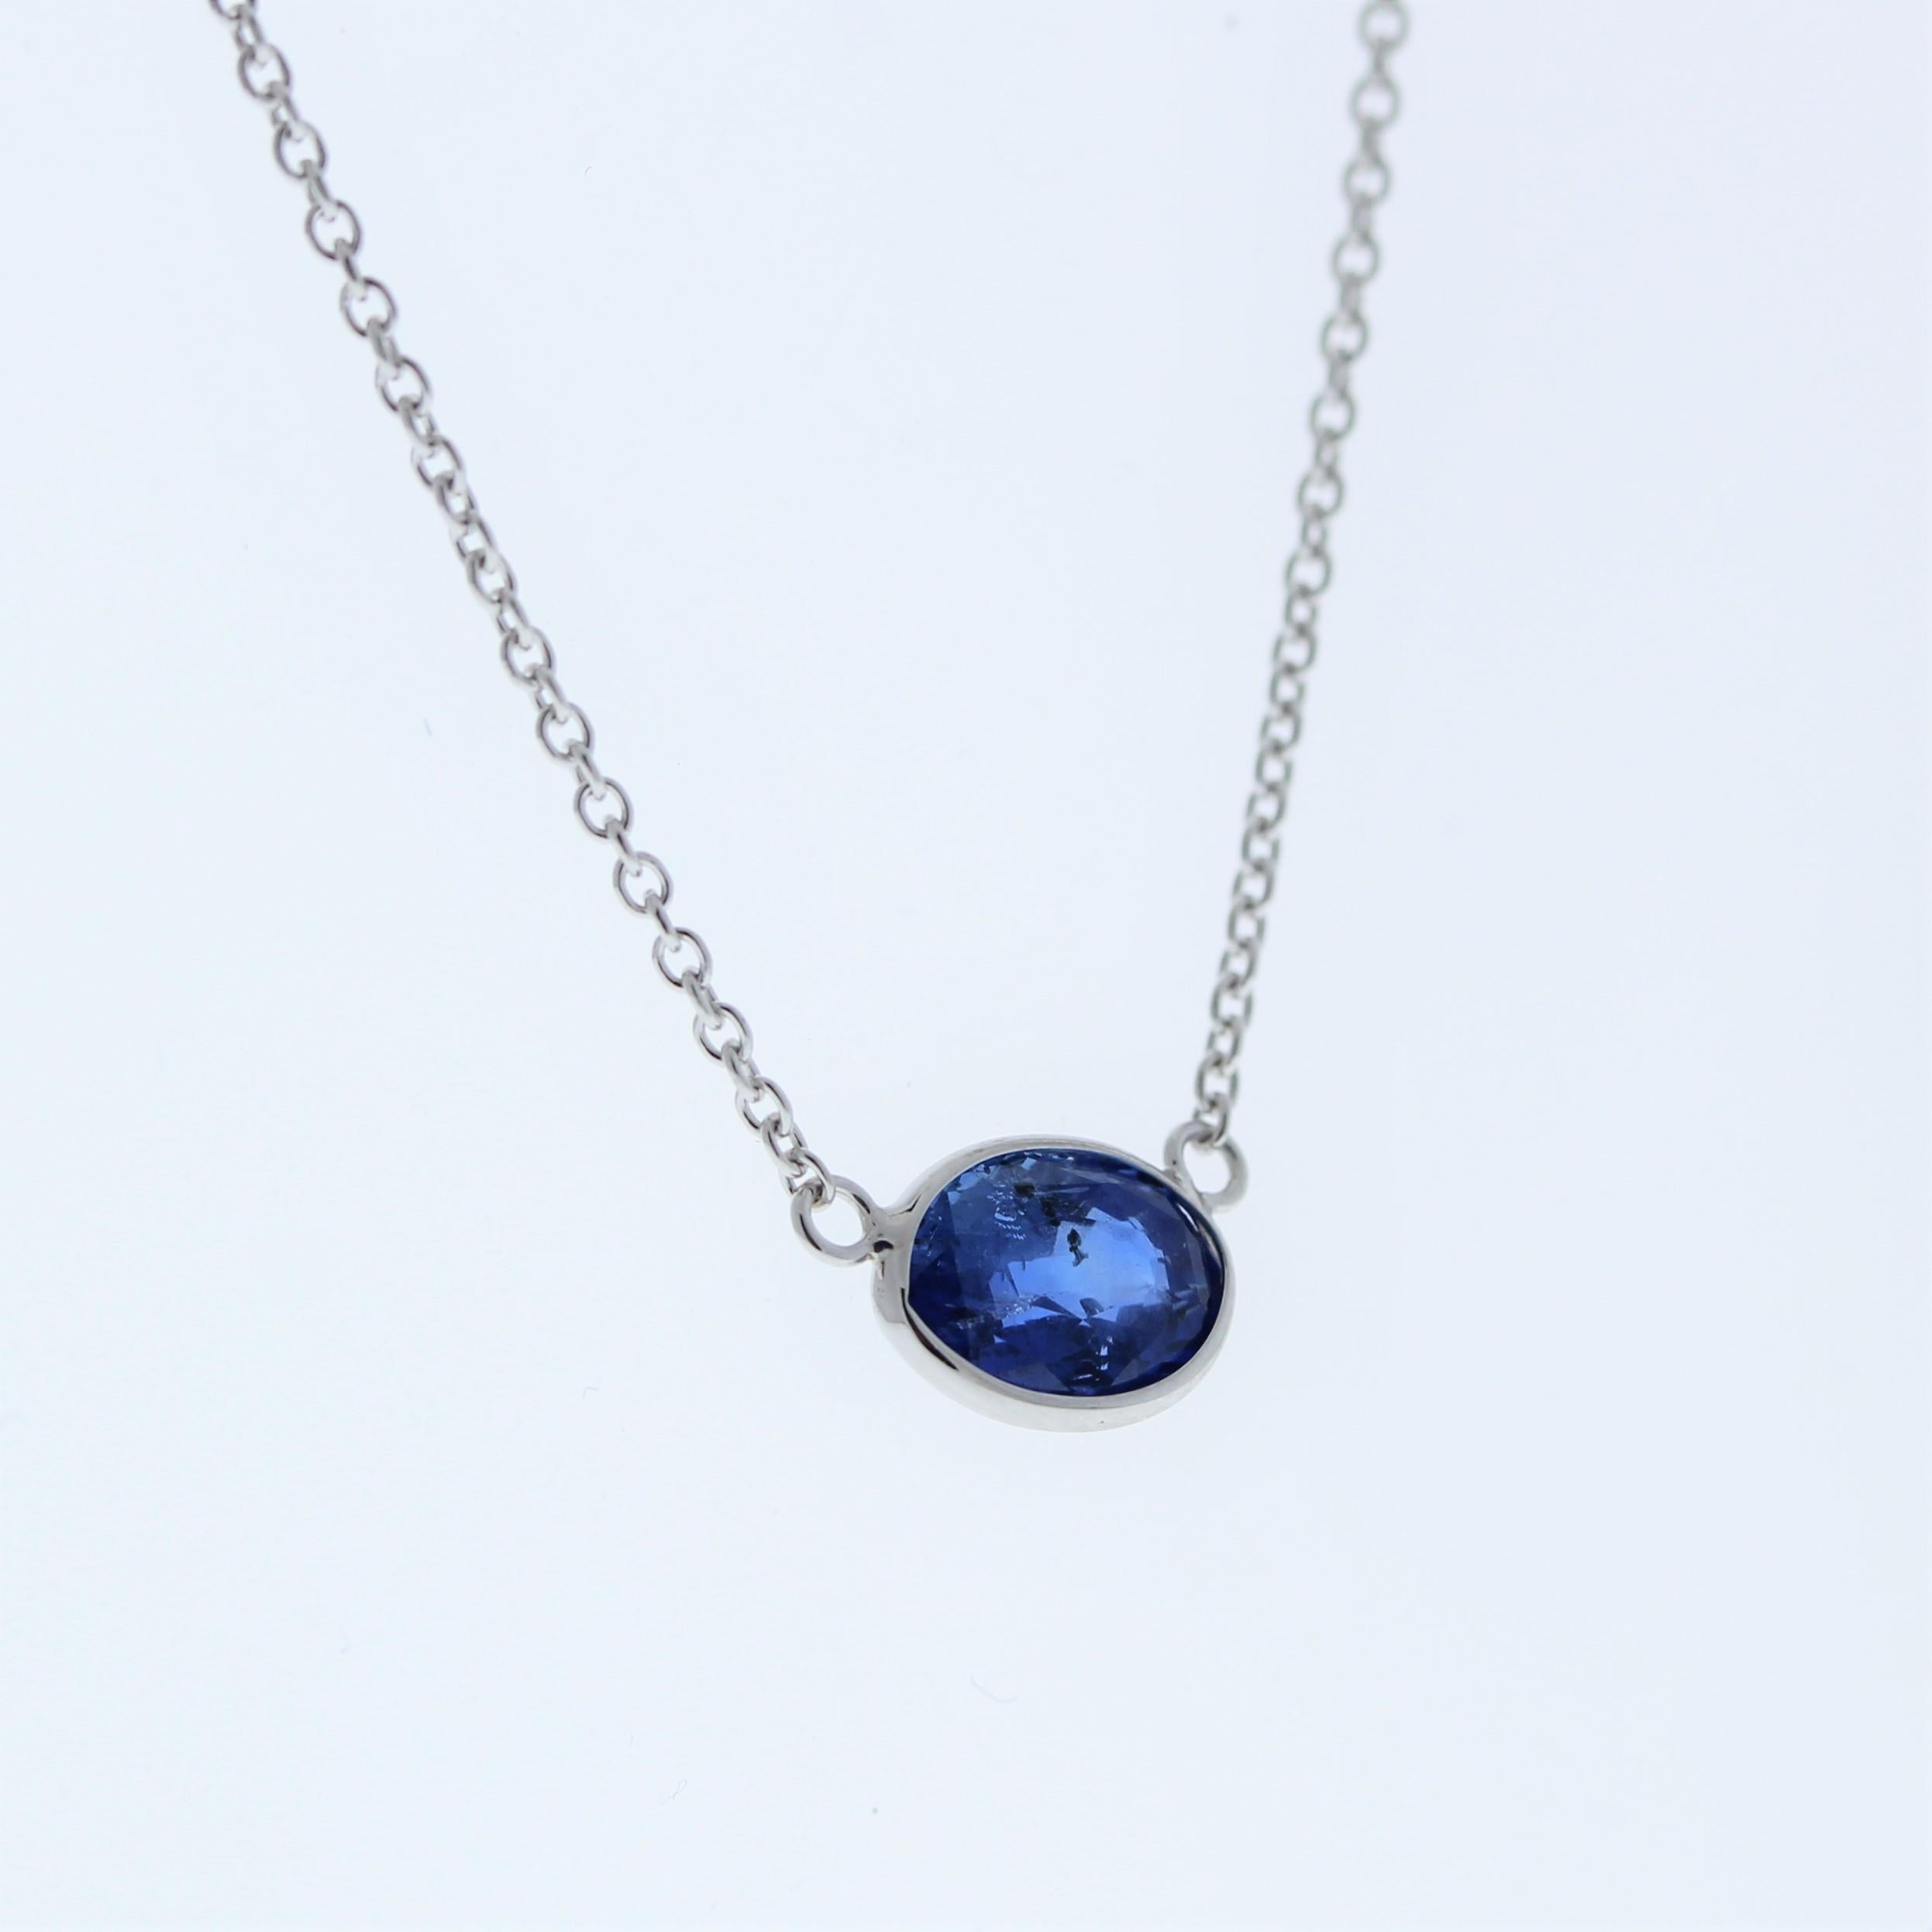 The necklace features a 1.58-carat oval-cut blue sapphire set in a 14 karat white gold pendant or setting. The oval cut and the blue sapphire's color against the white gold setting are likely to create an elegant and versatile fashion piece,